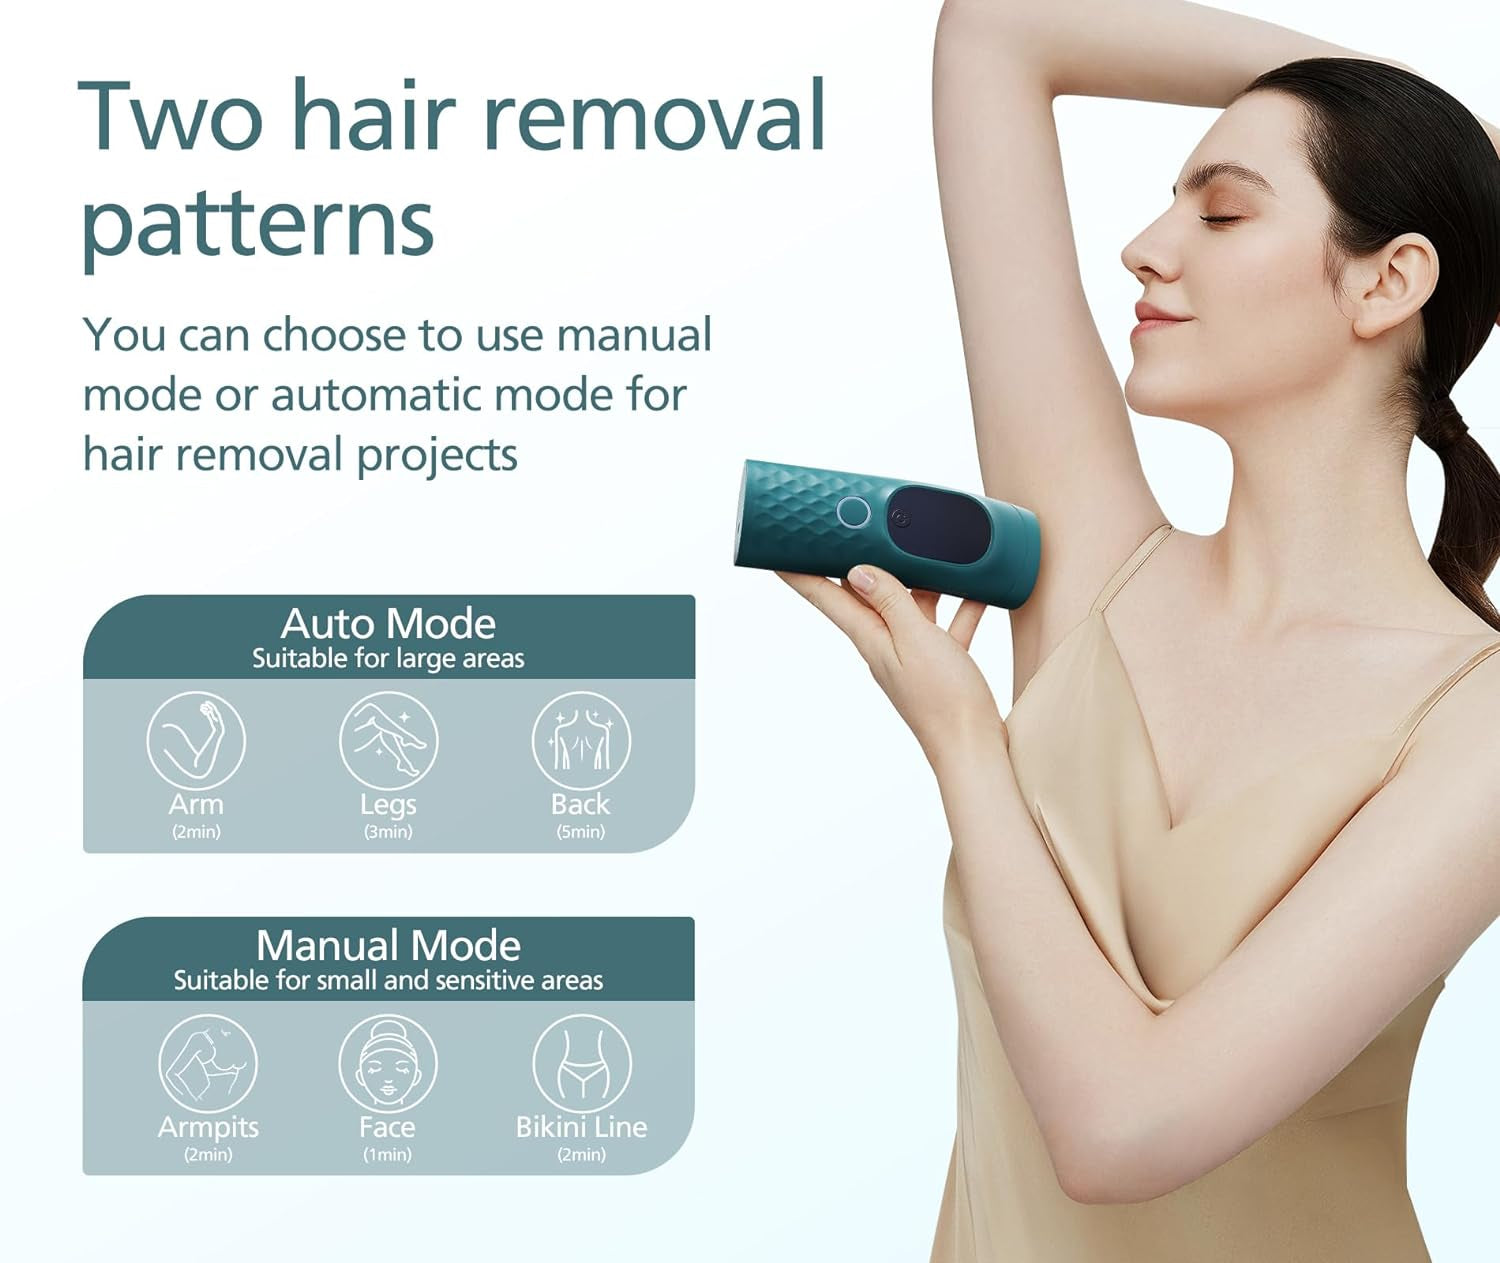 Laser Hair Removal for Women and Men, 5 Gears Hair Removal Device, IPL Hair Removal with Ice-Cooling System for Long-Lasting Result, 999,997 Times for Body & Face At-Home Use, FDA Registered